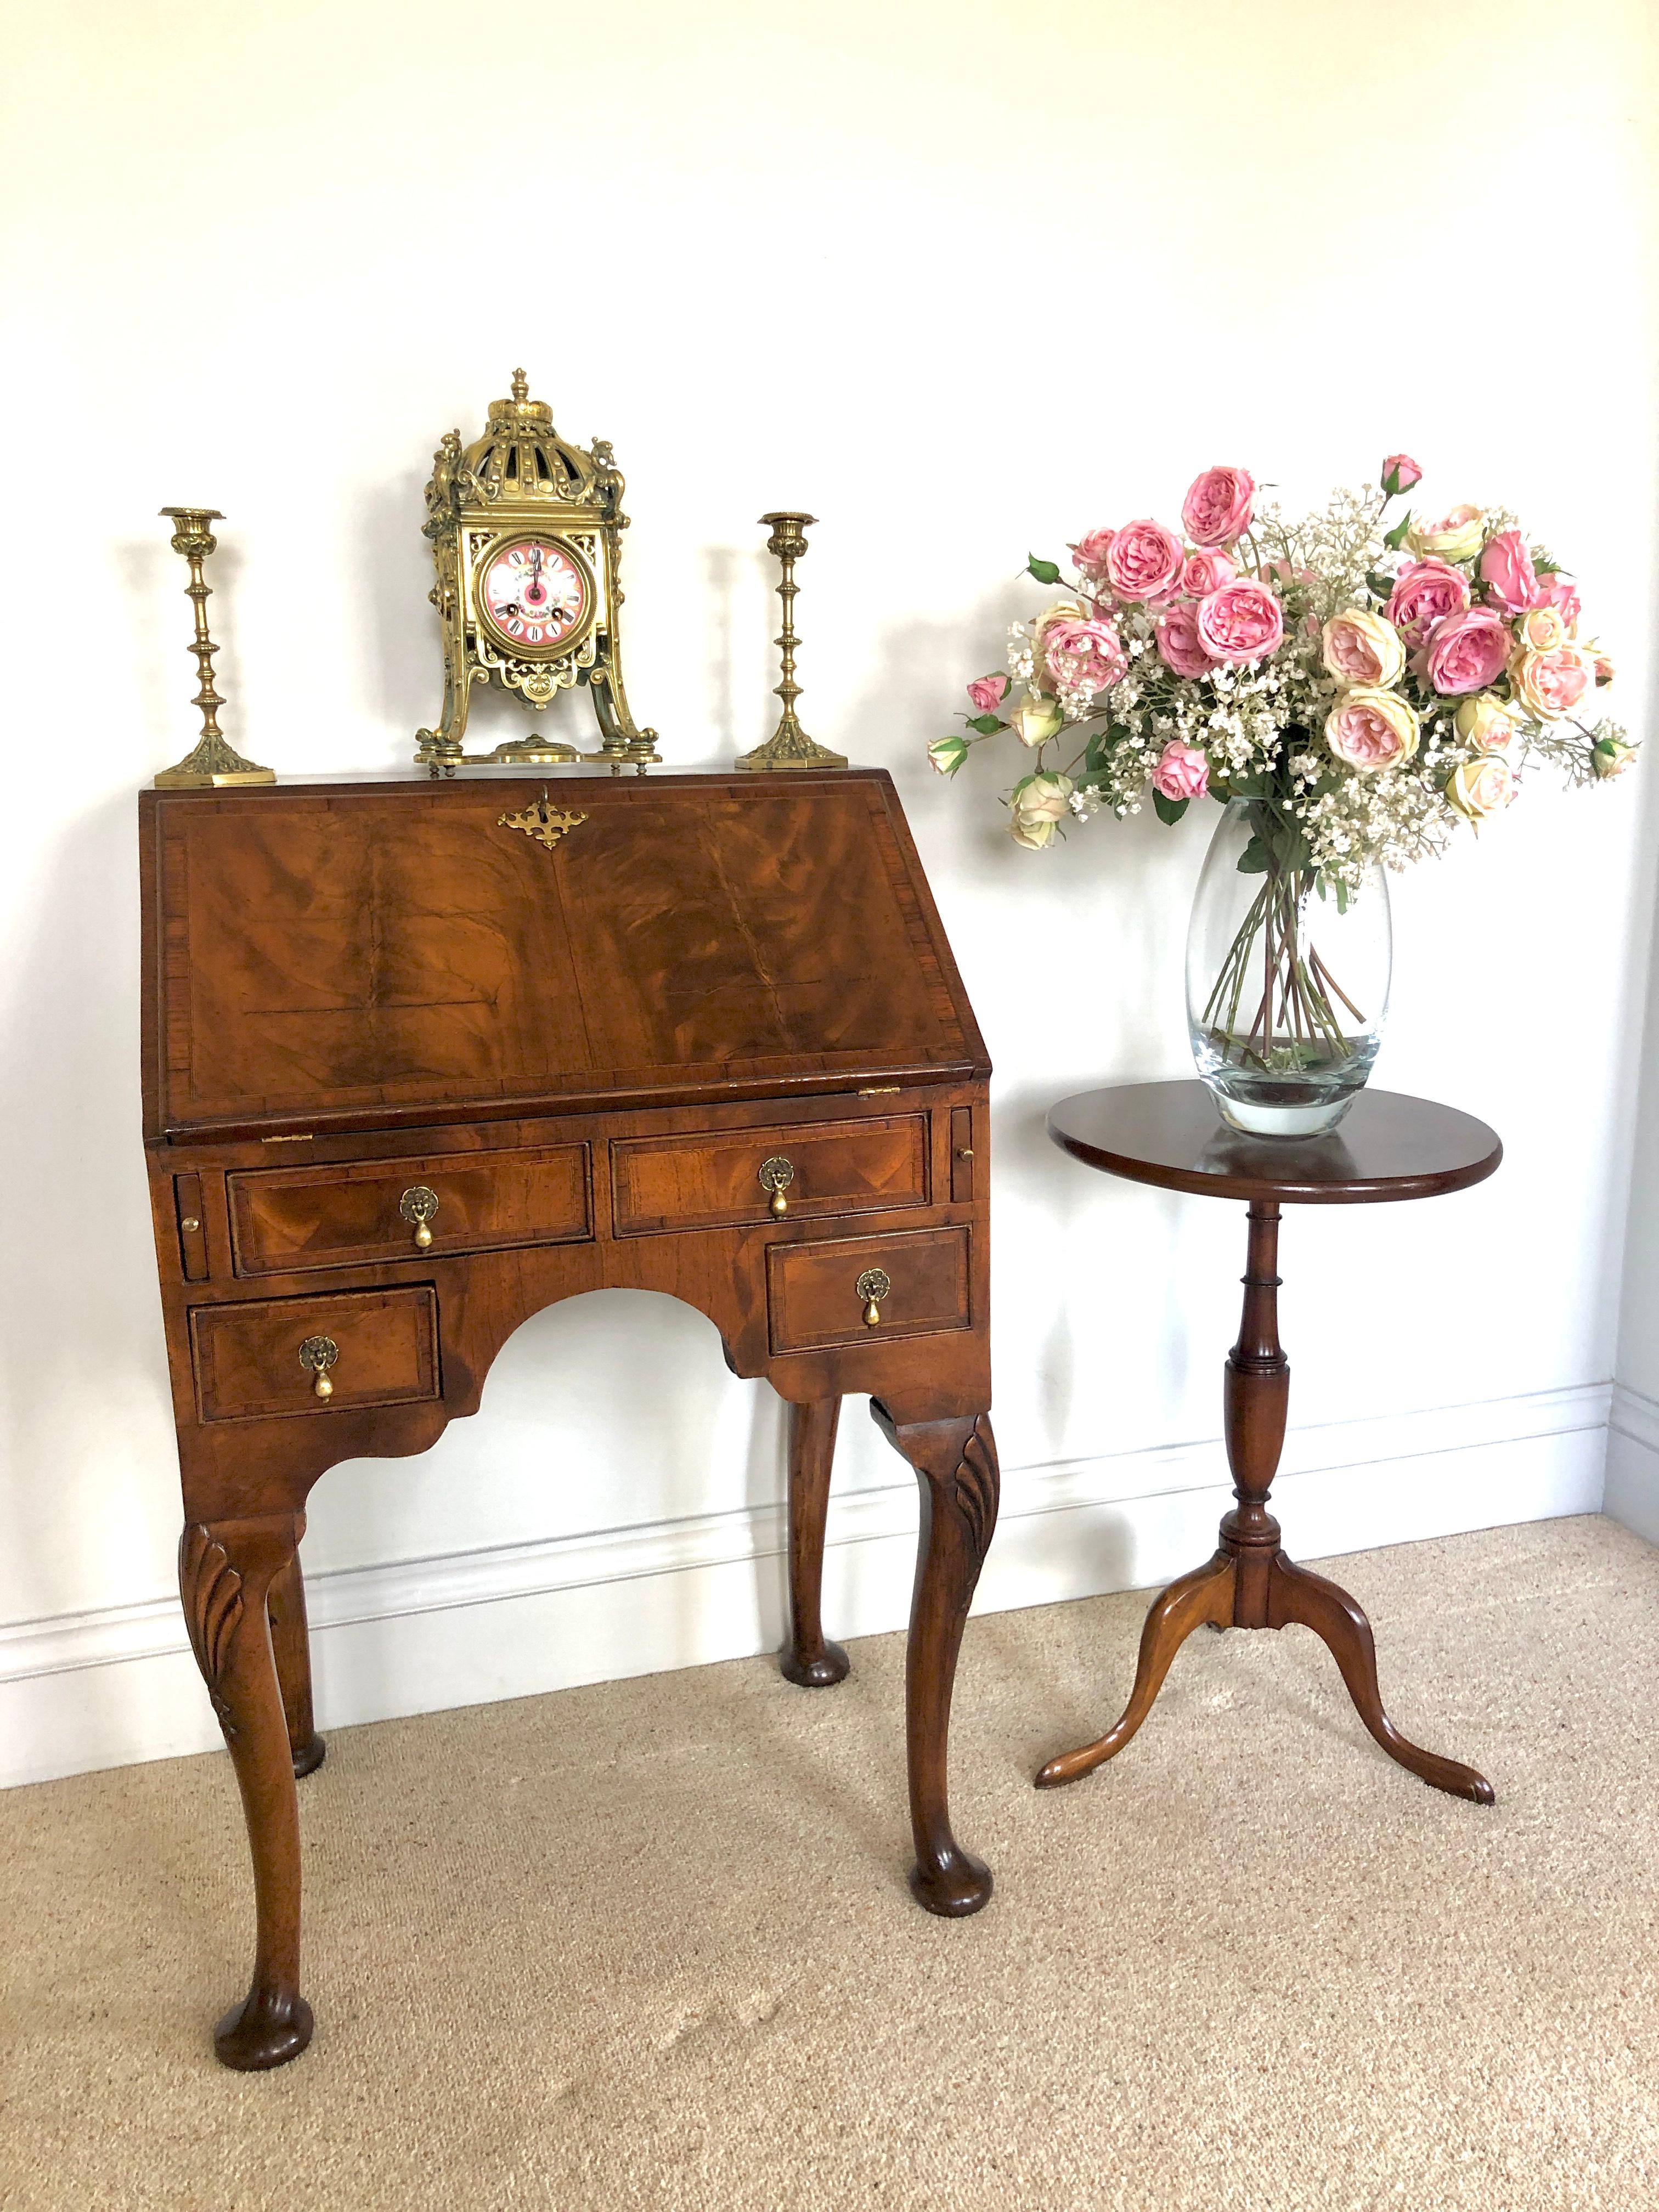 Antique Victorian figured walnut bureau having a figured walnut cross banded fall with original brass escutcheon opening to reveal a charming fitted interior consisting of two drawers, pigeon holes and a door to the centre, two long drawers below